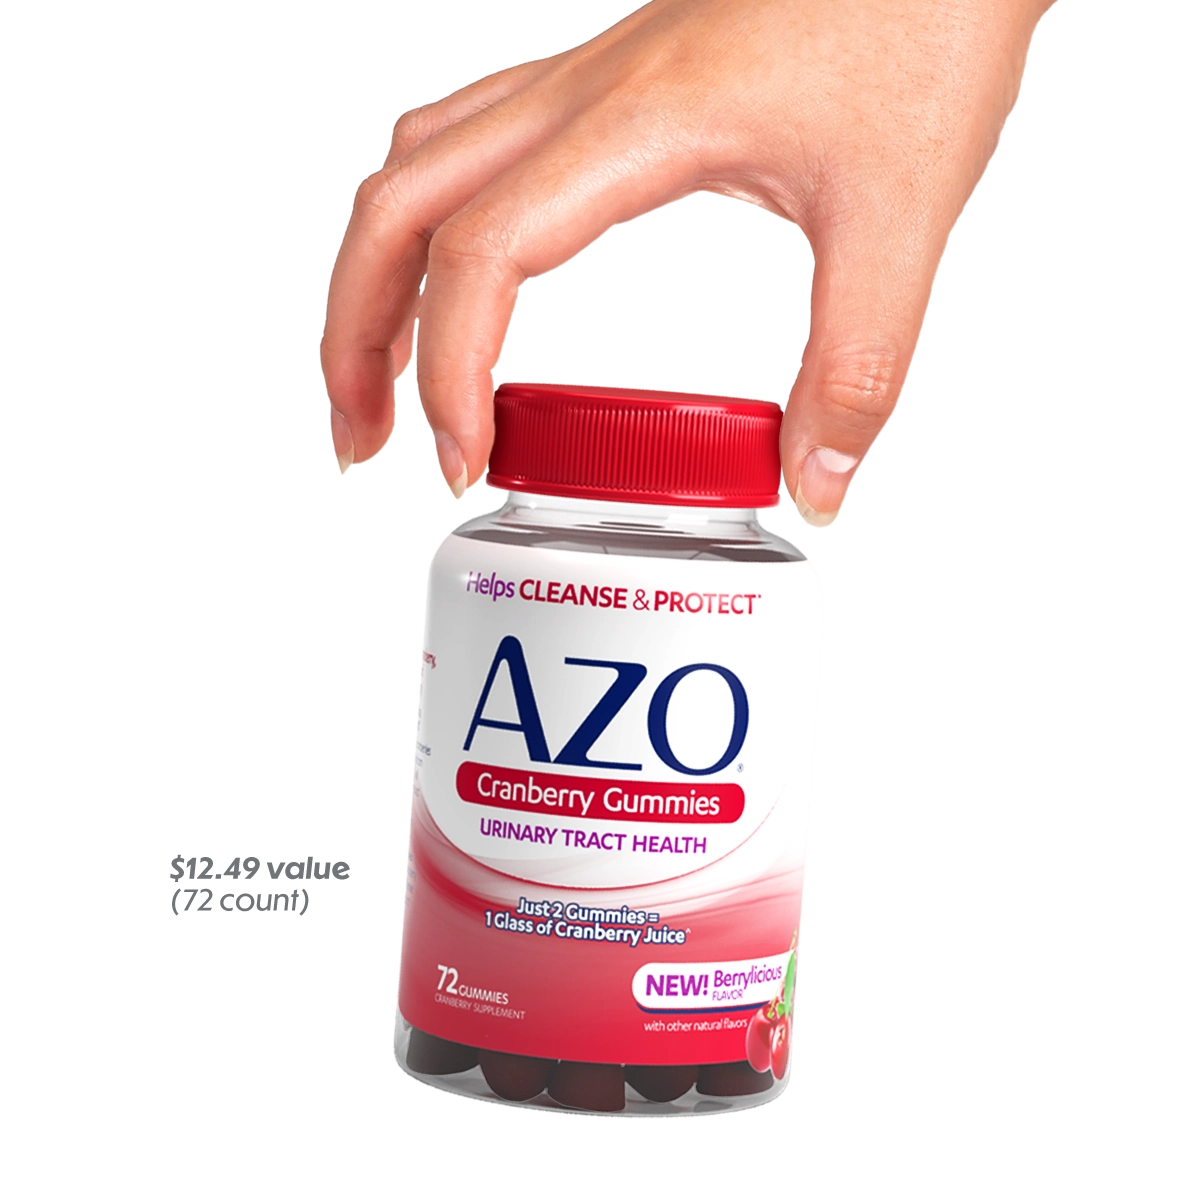 hand holding a bottle of azo cranberry gummies